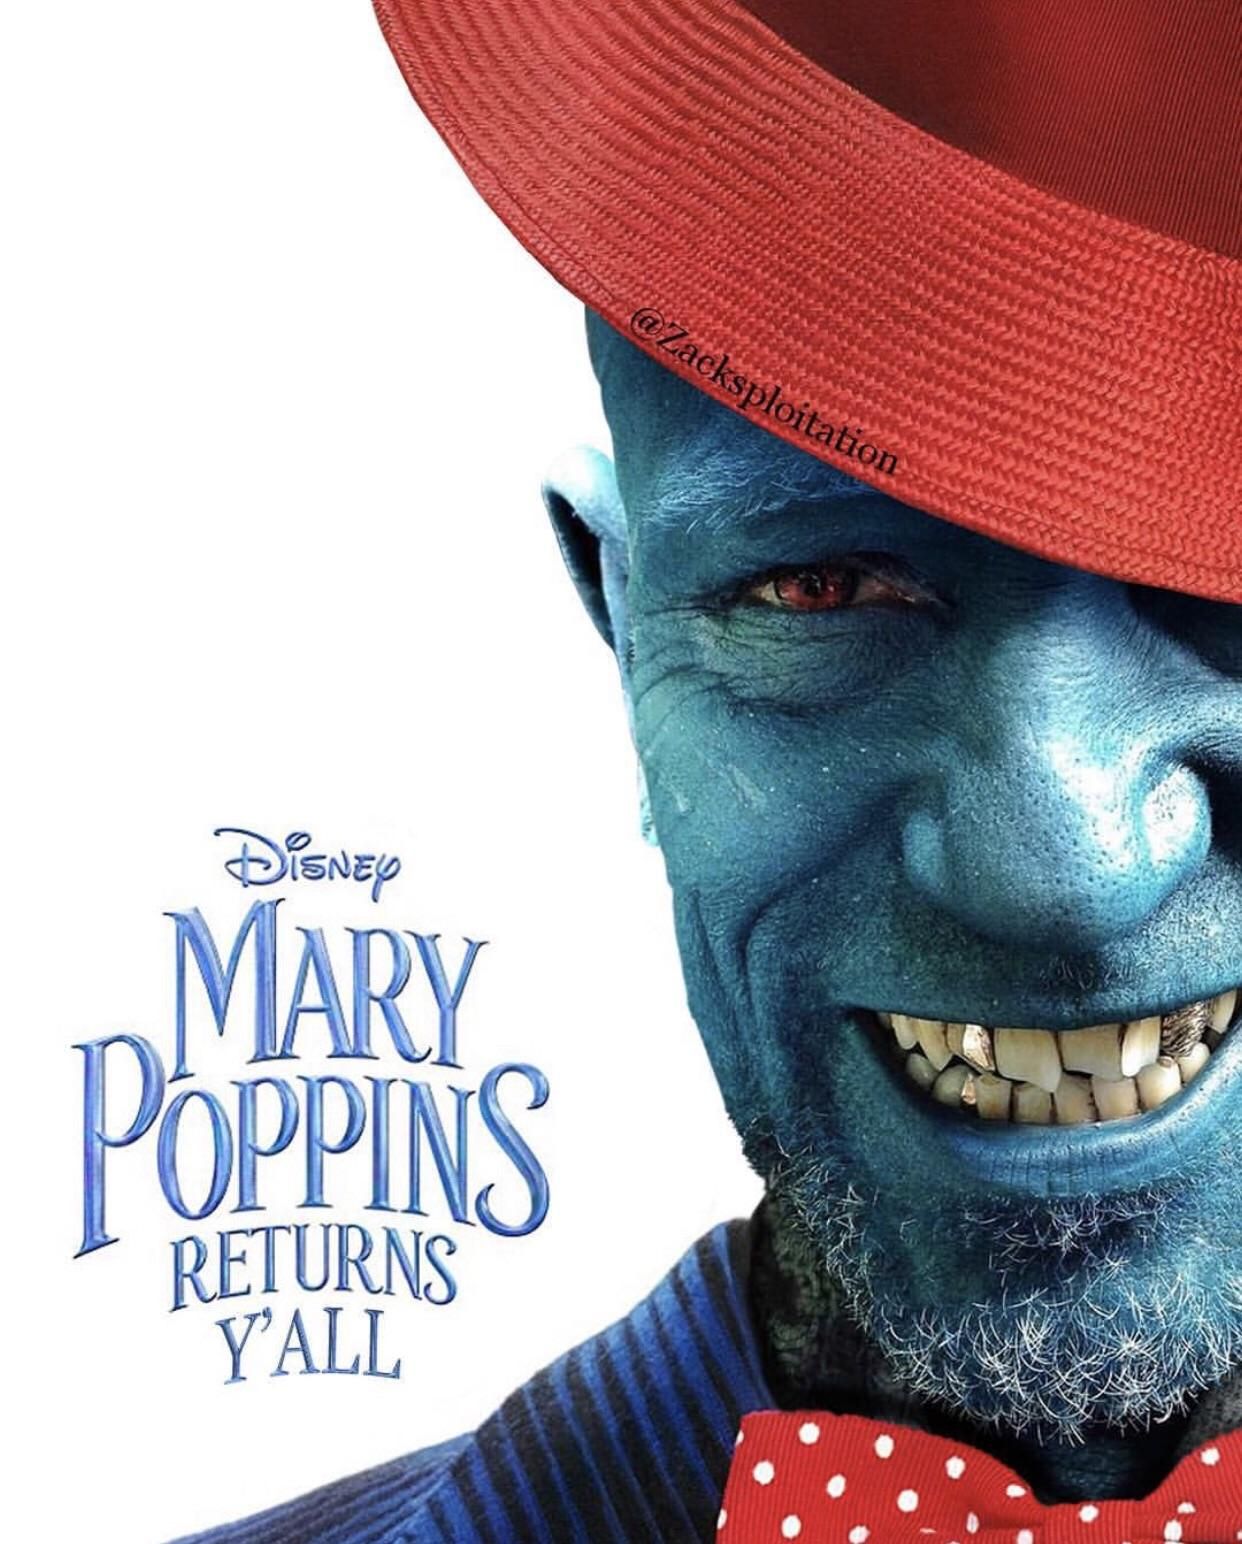 In Mary poppins y’all